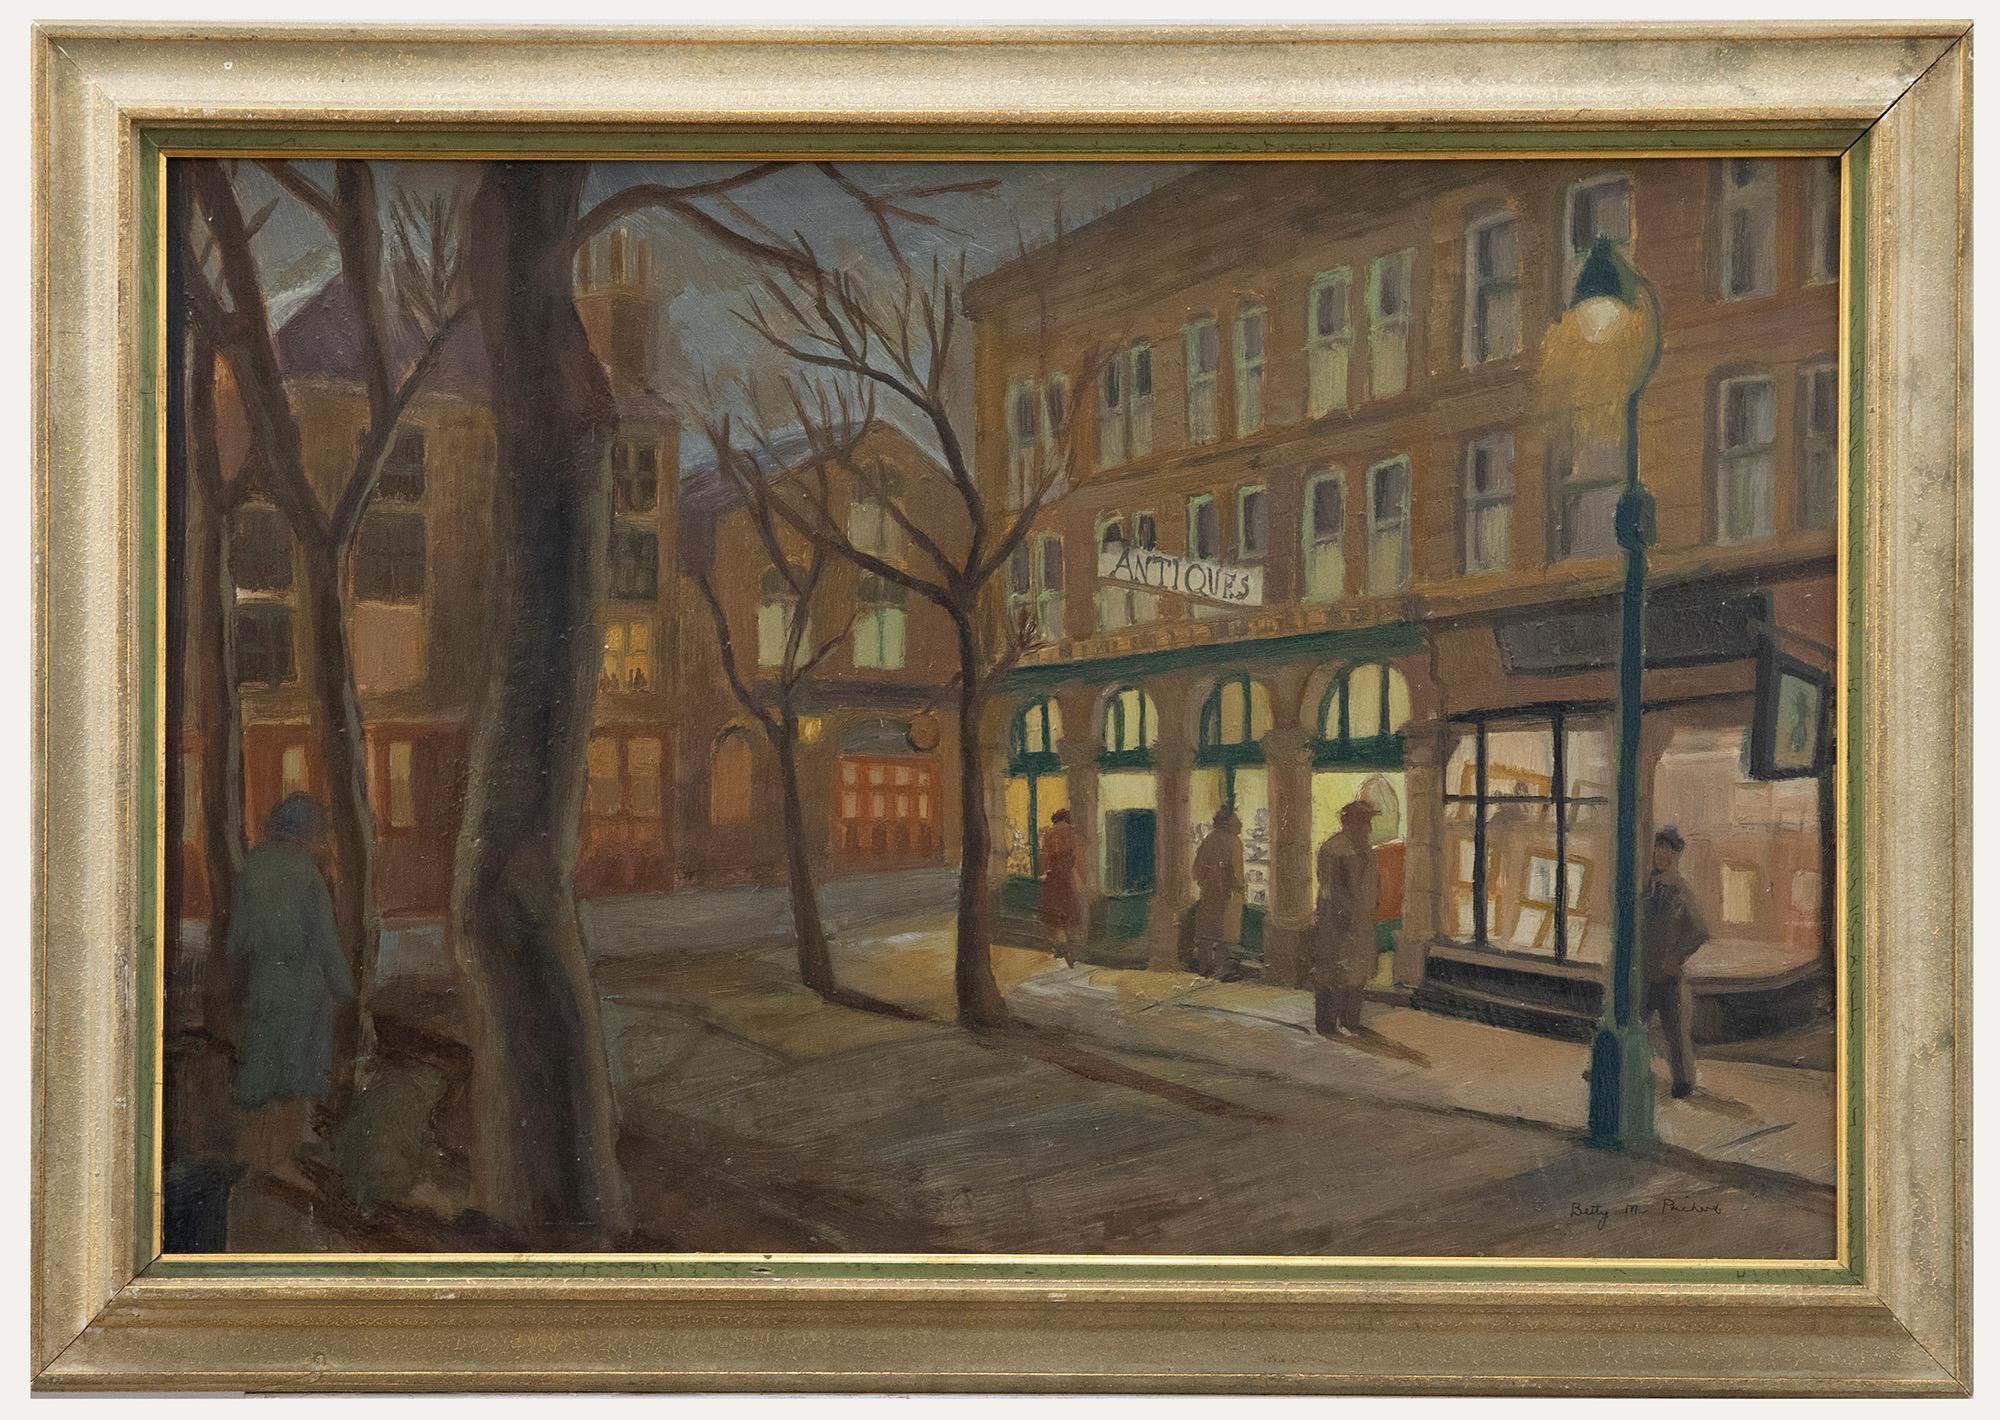 Unknown Landscape Painting - Betty M. Pritchard  - Mid 20th Century Oil, Outside the Antique Shop